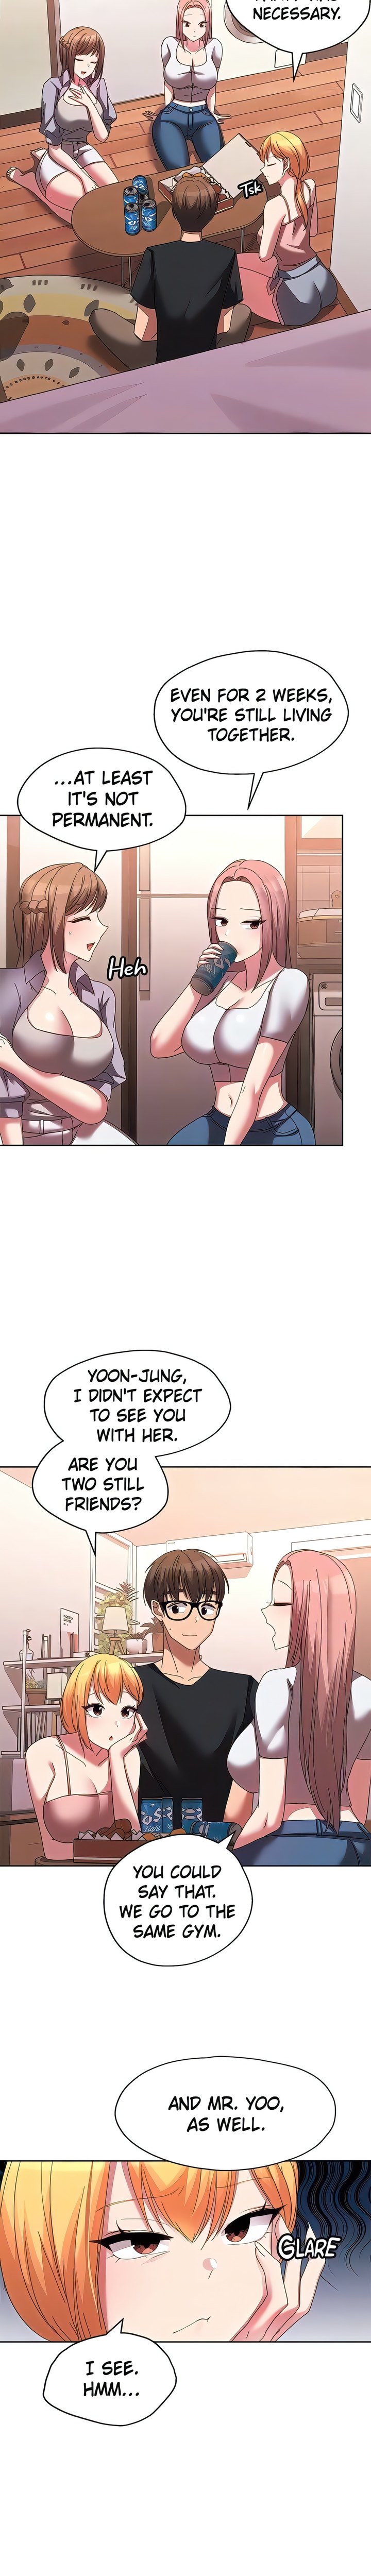 girls-i-used-to-teach-chap-31-5